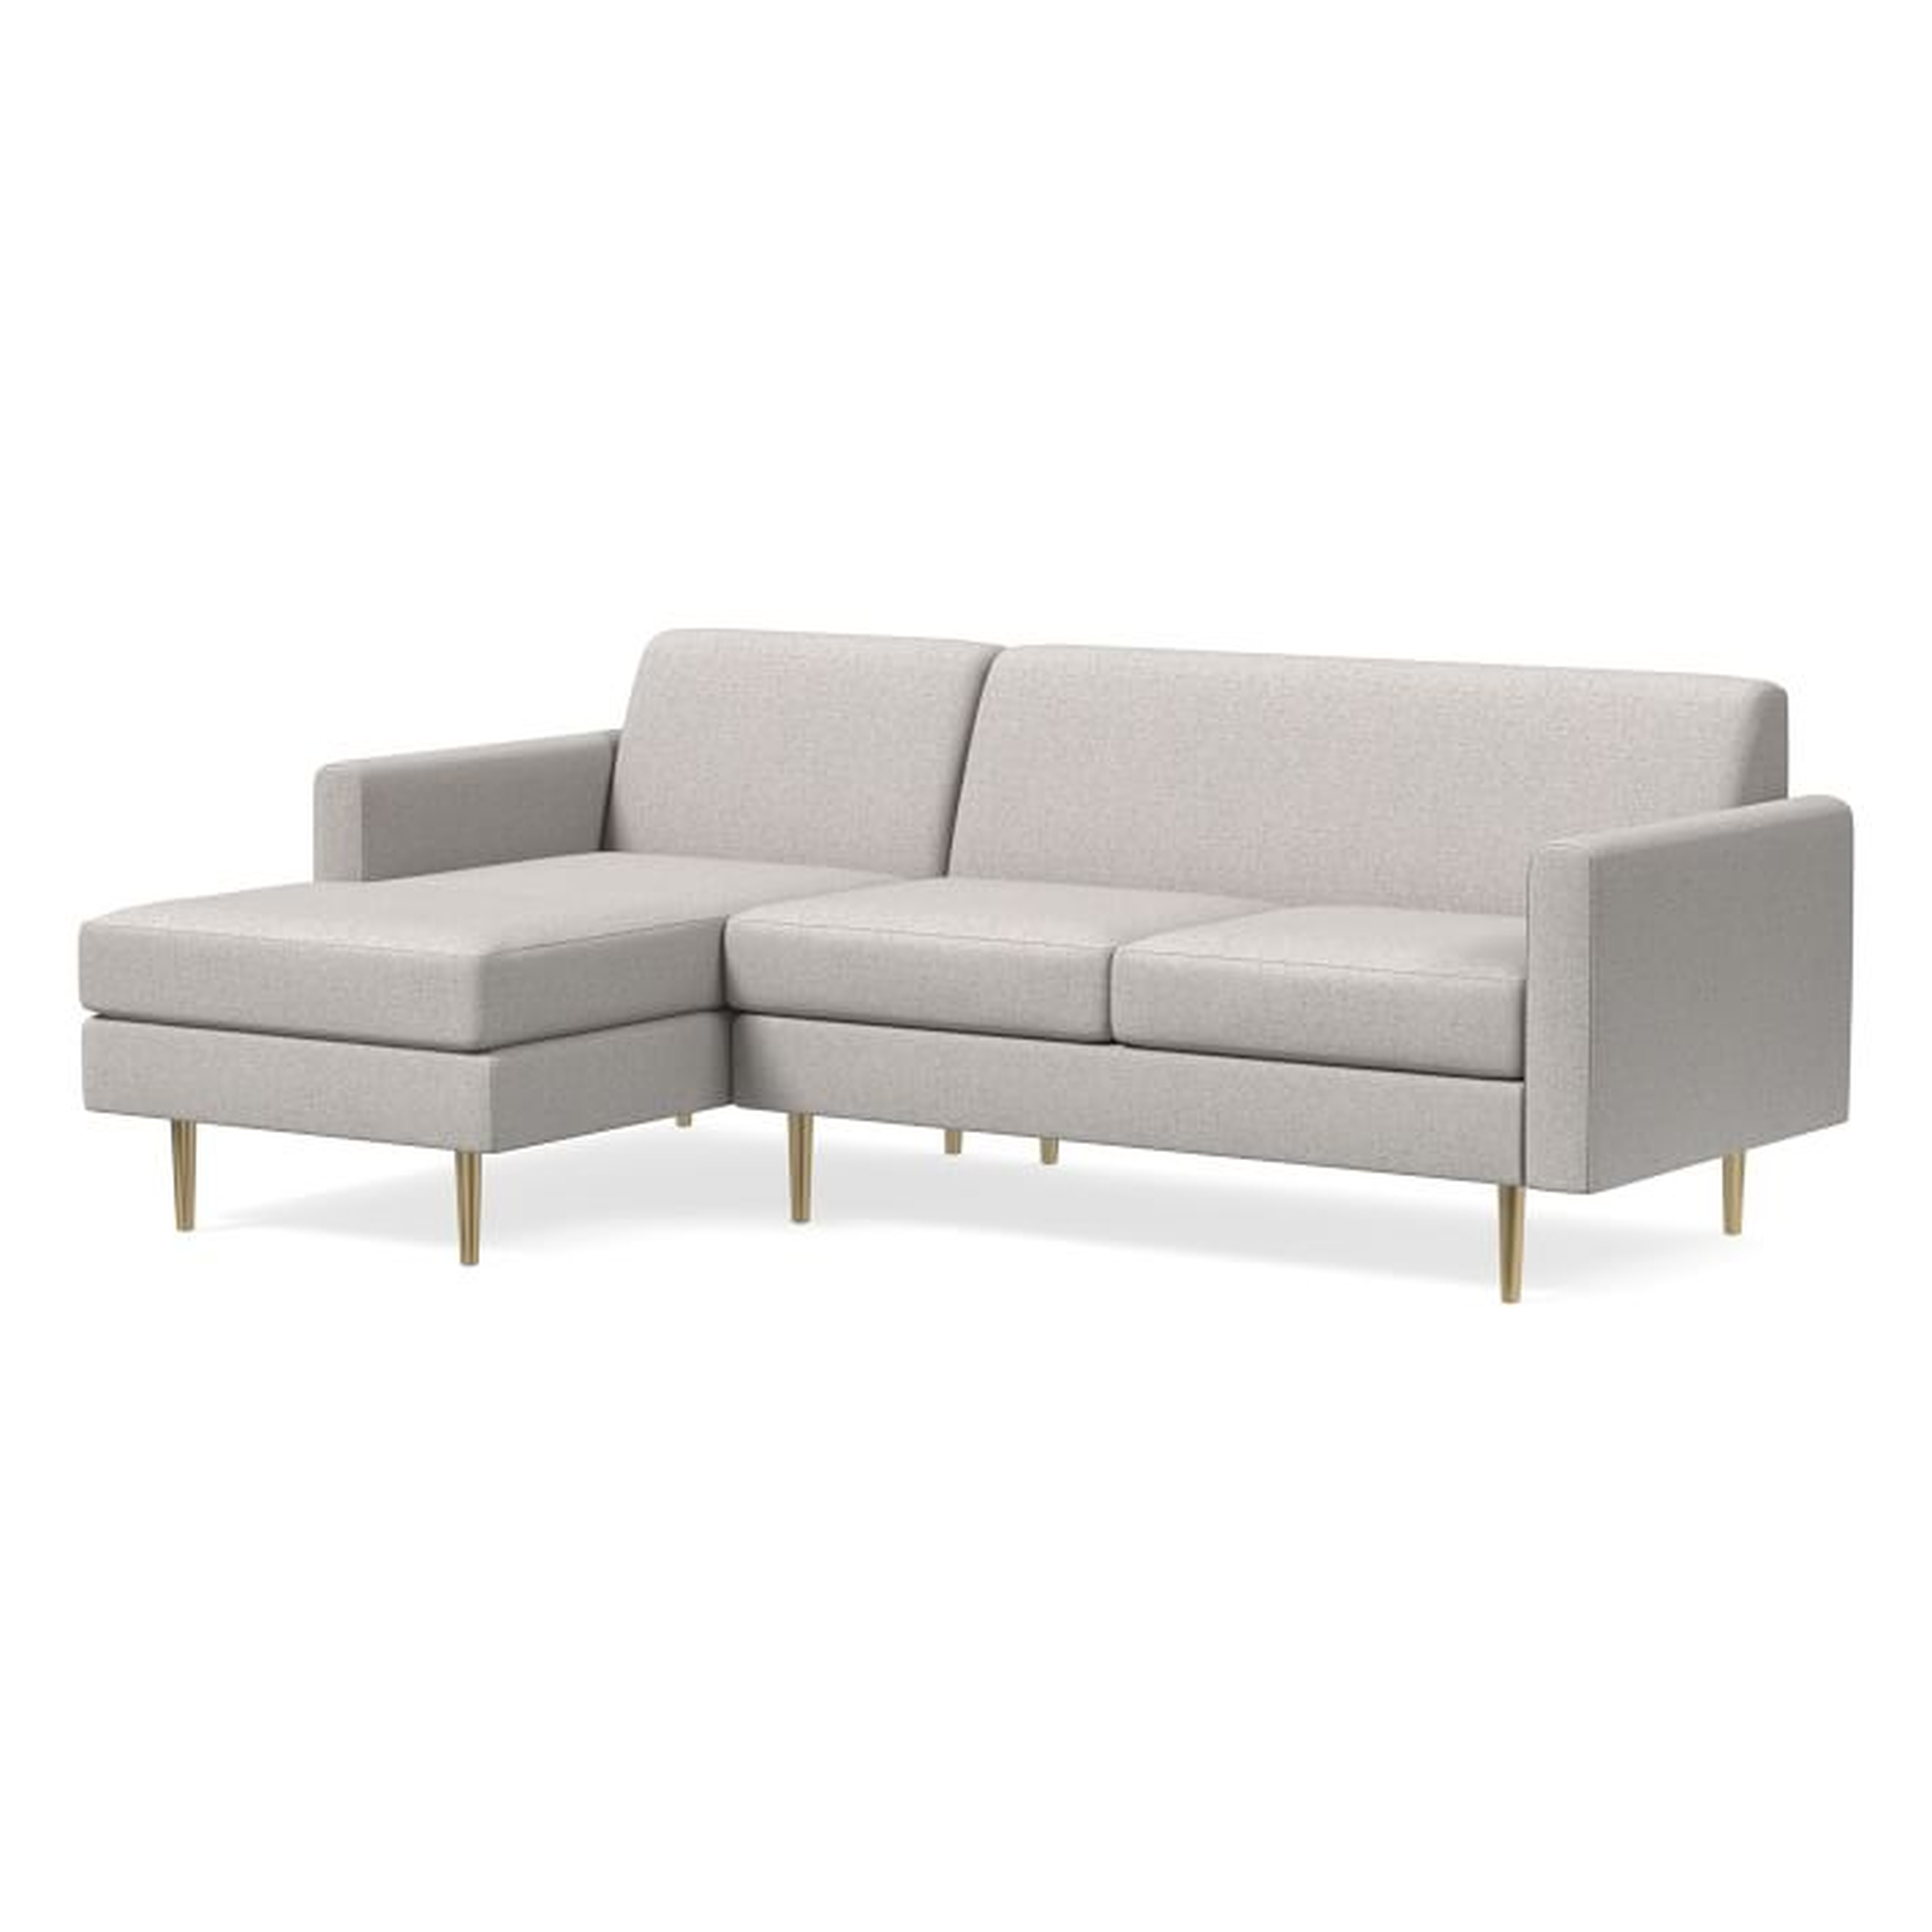 Olive Sectional Set 04: Olive Standard Back Mailbox Arm Left Arm Sofa, Olive Standard Back Mailbox Arm Right Arm Chaise, Poly, Performance Coastal Linen, Pebble Stone, Antique Brass - West Elm